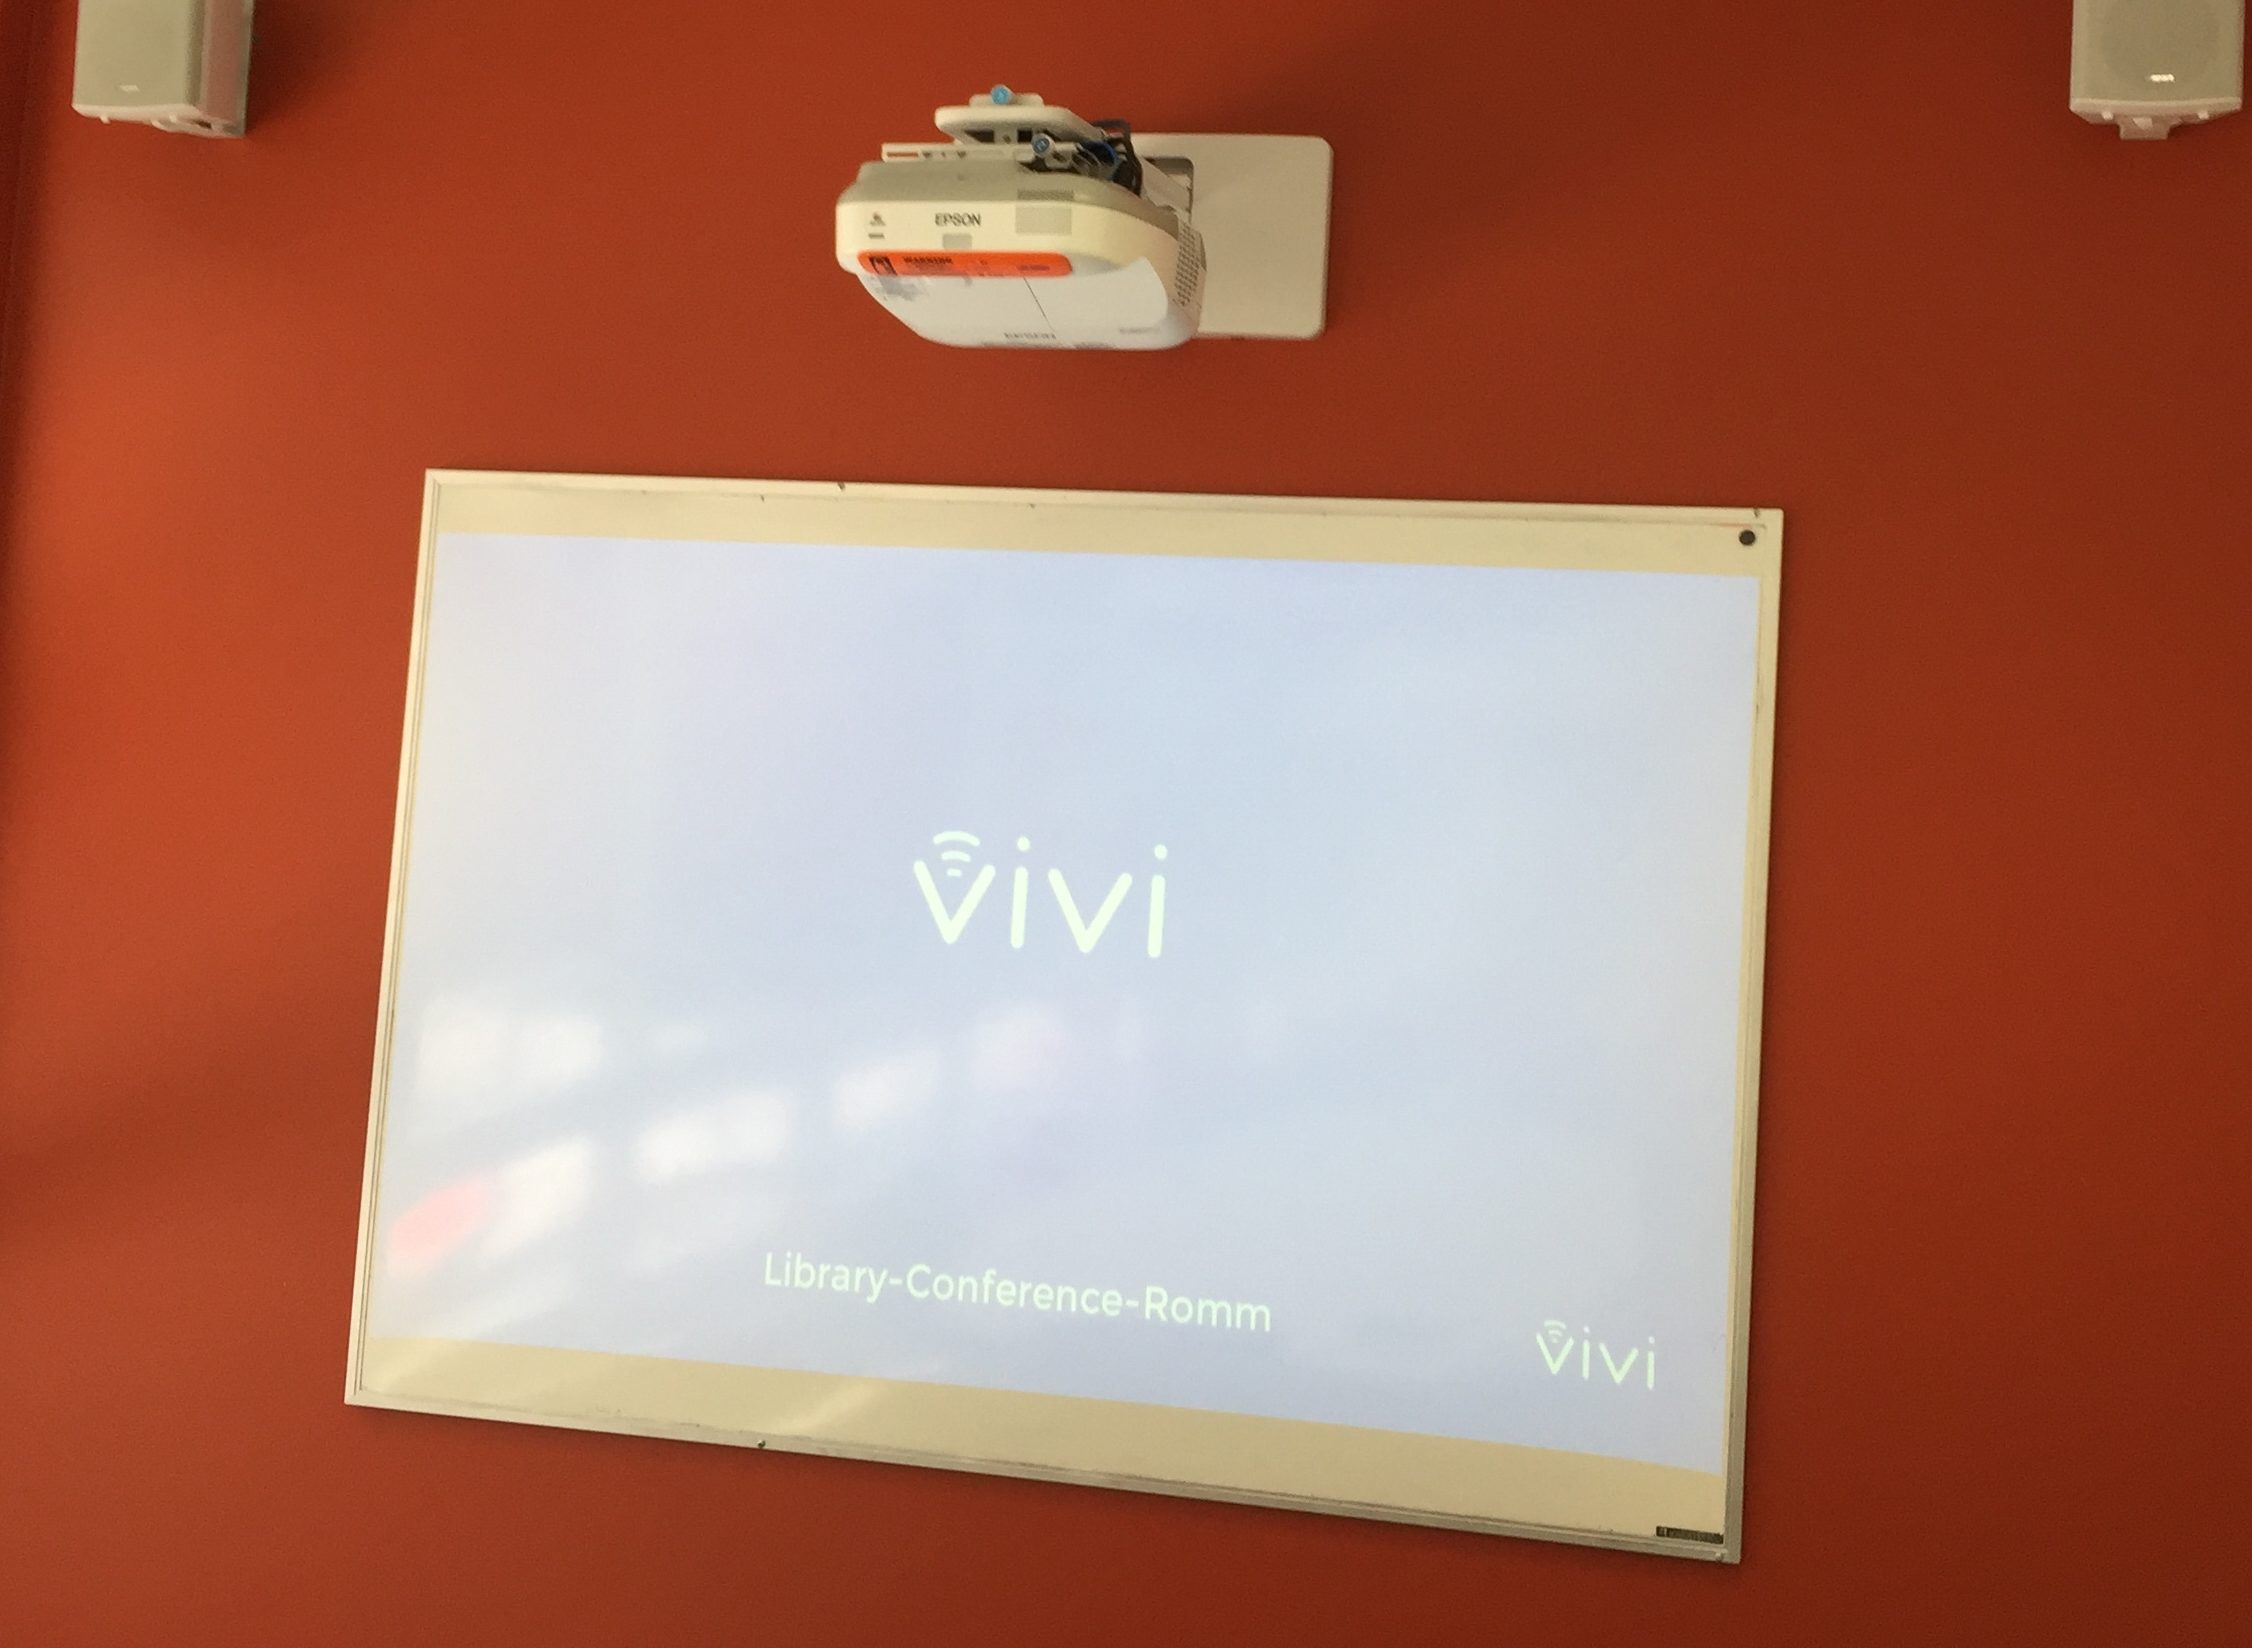 EPSON EB-685W and the Vivi system at Melbourne Girls Grammar